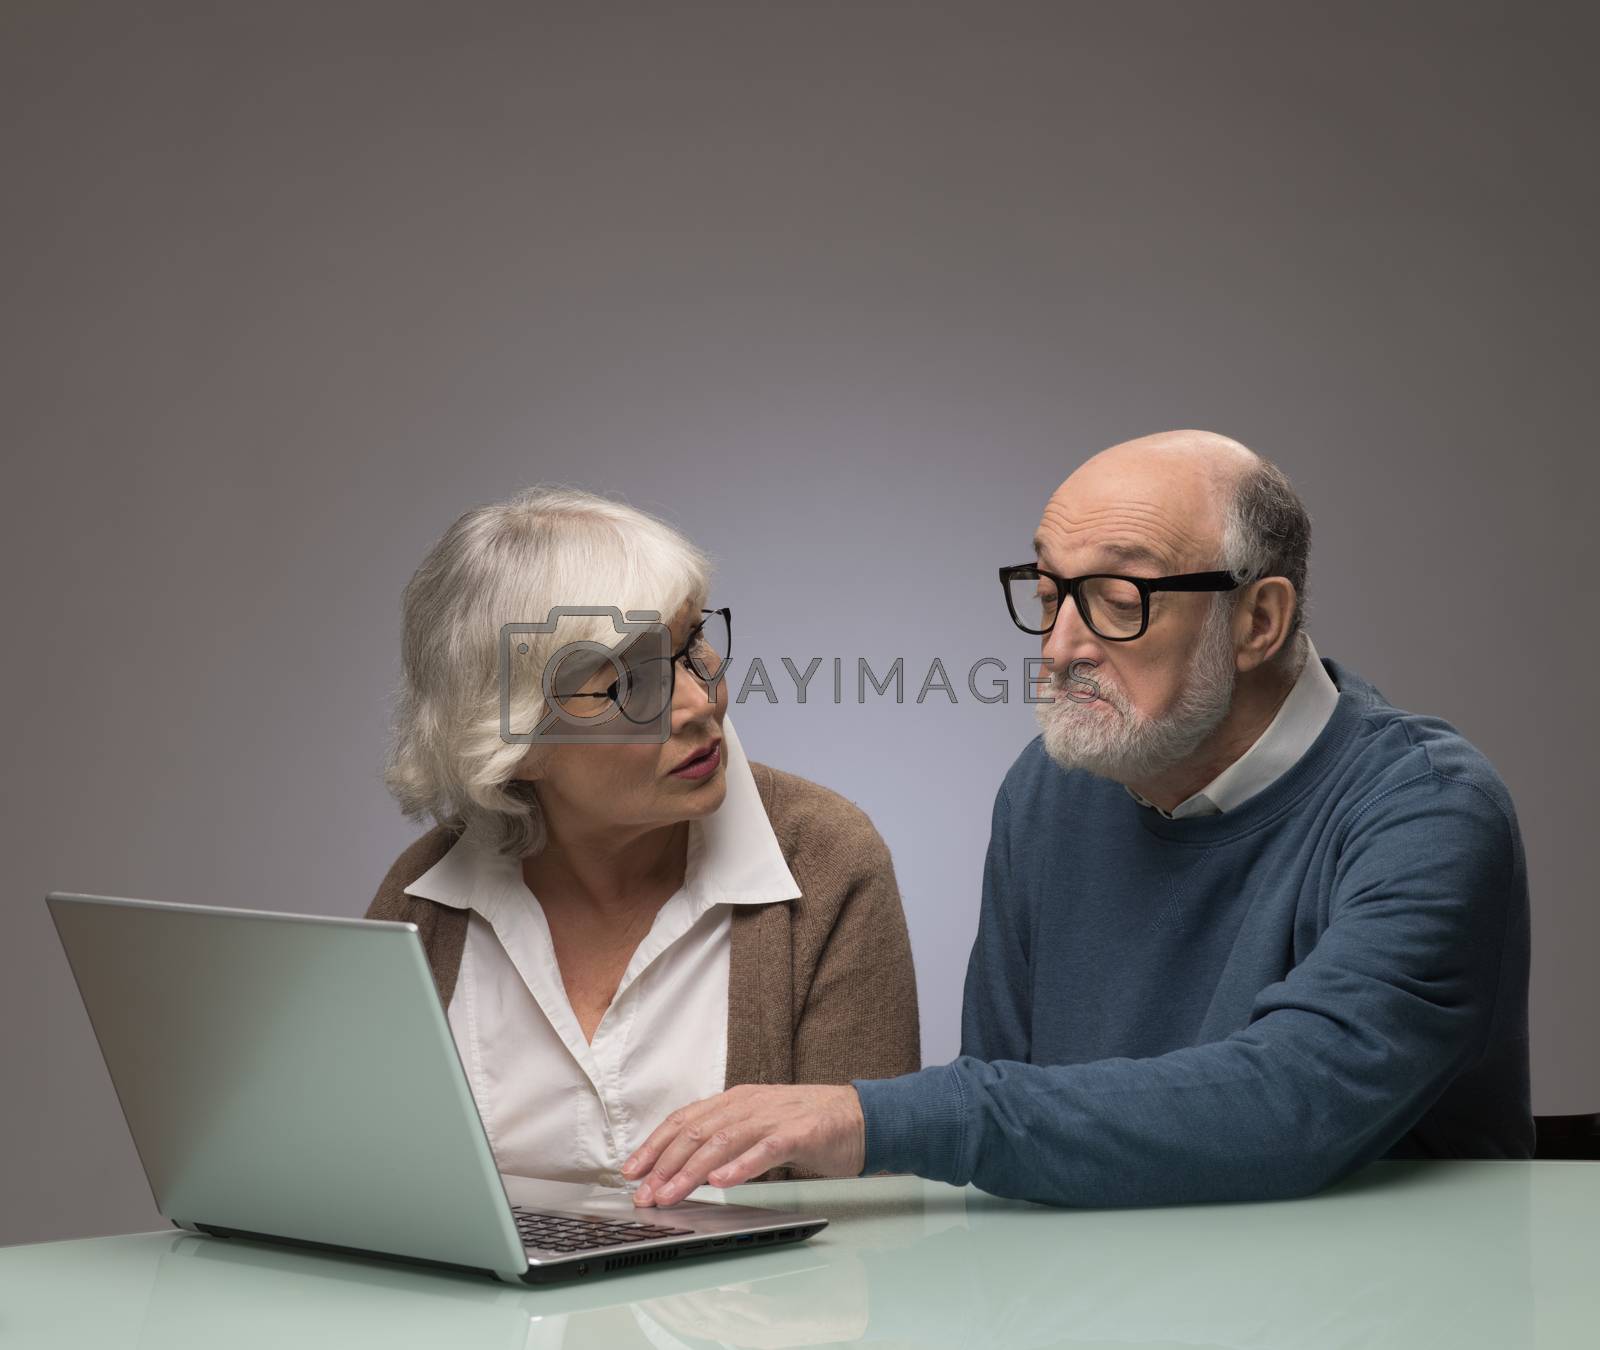 Royalty free image of Senior couple looking at laptop by ALotOfPeople